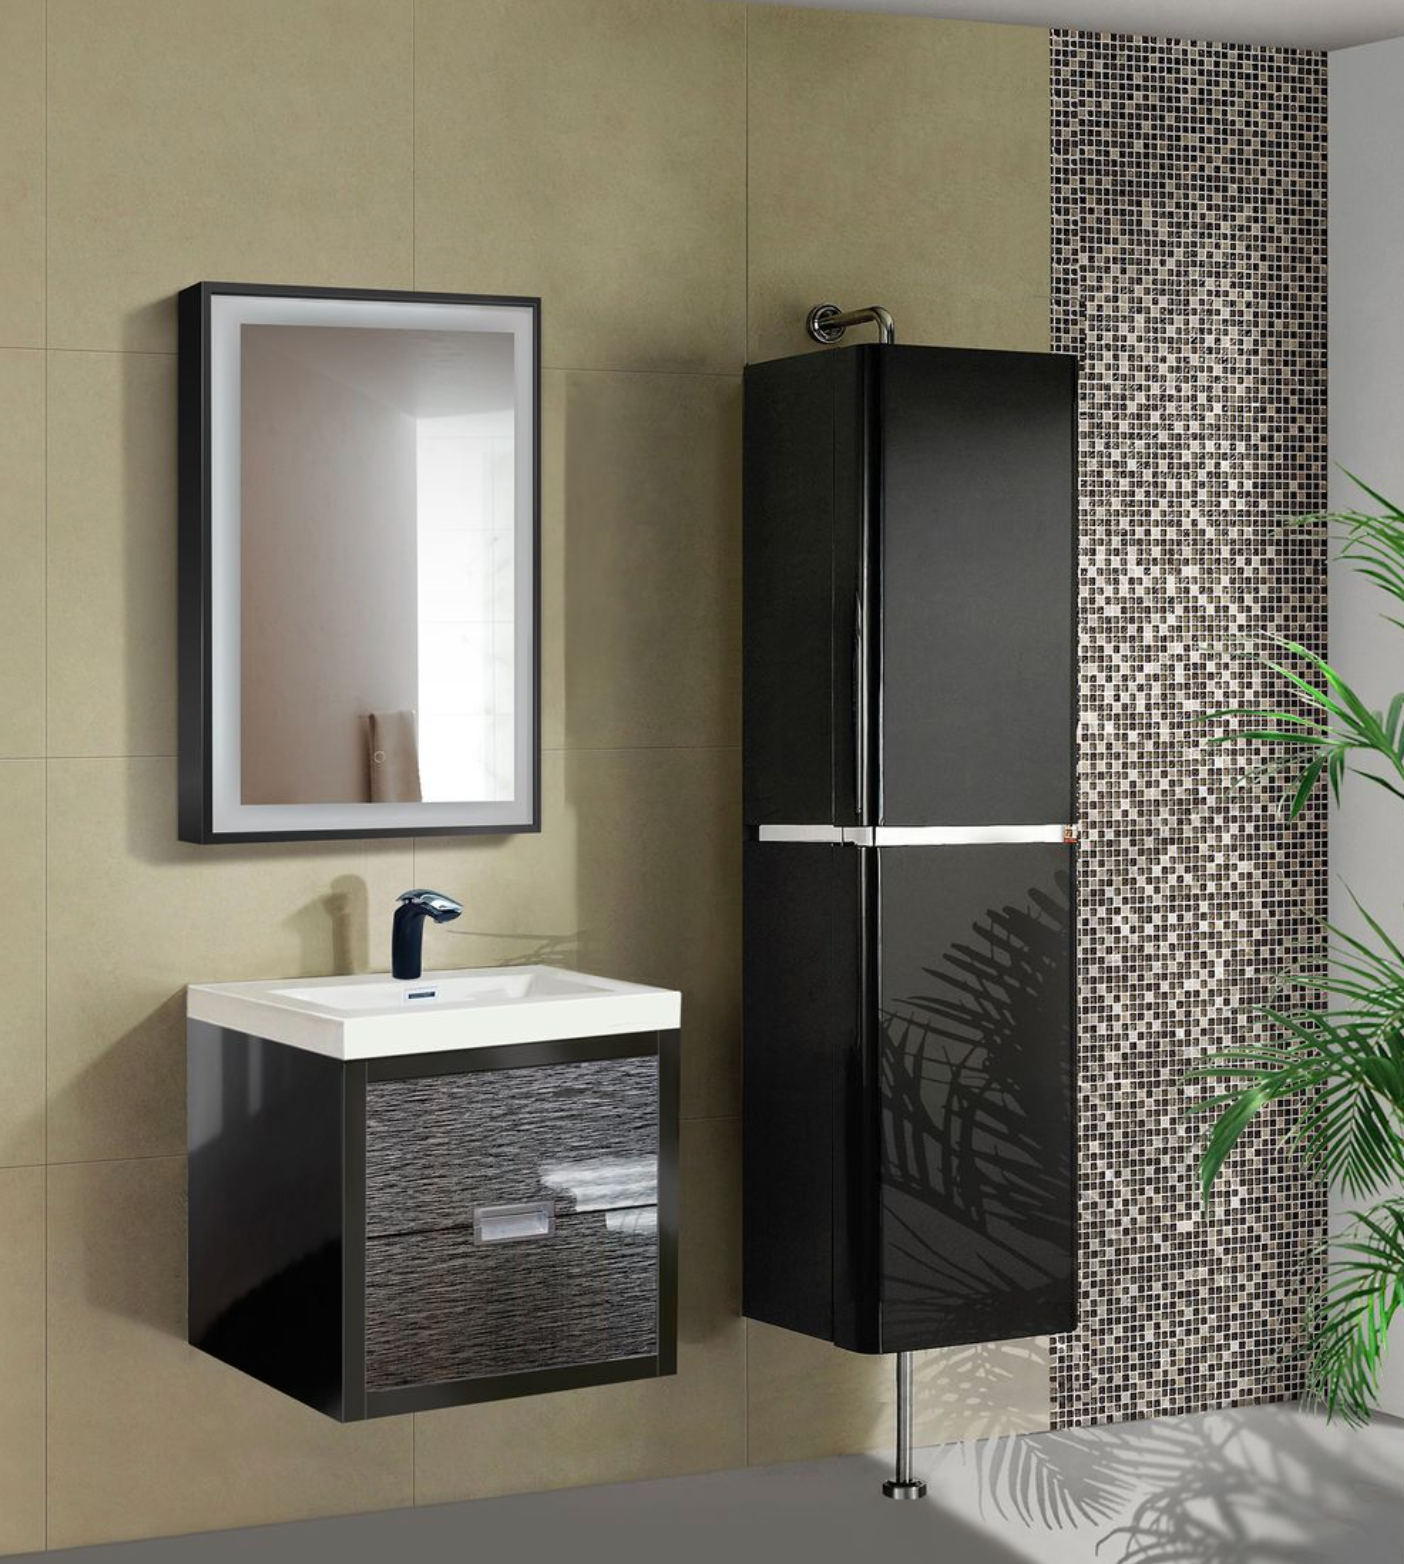 SOHO 24 X 36 Bathroom LED Mirror comes in Gold and Black Finishes